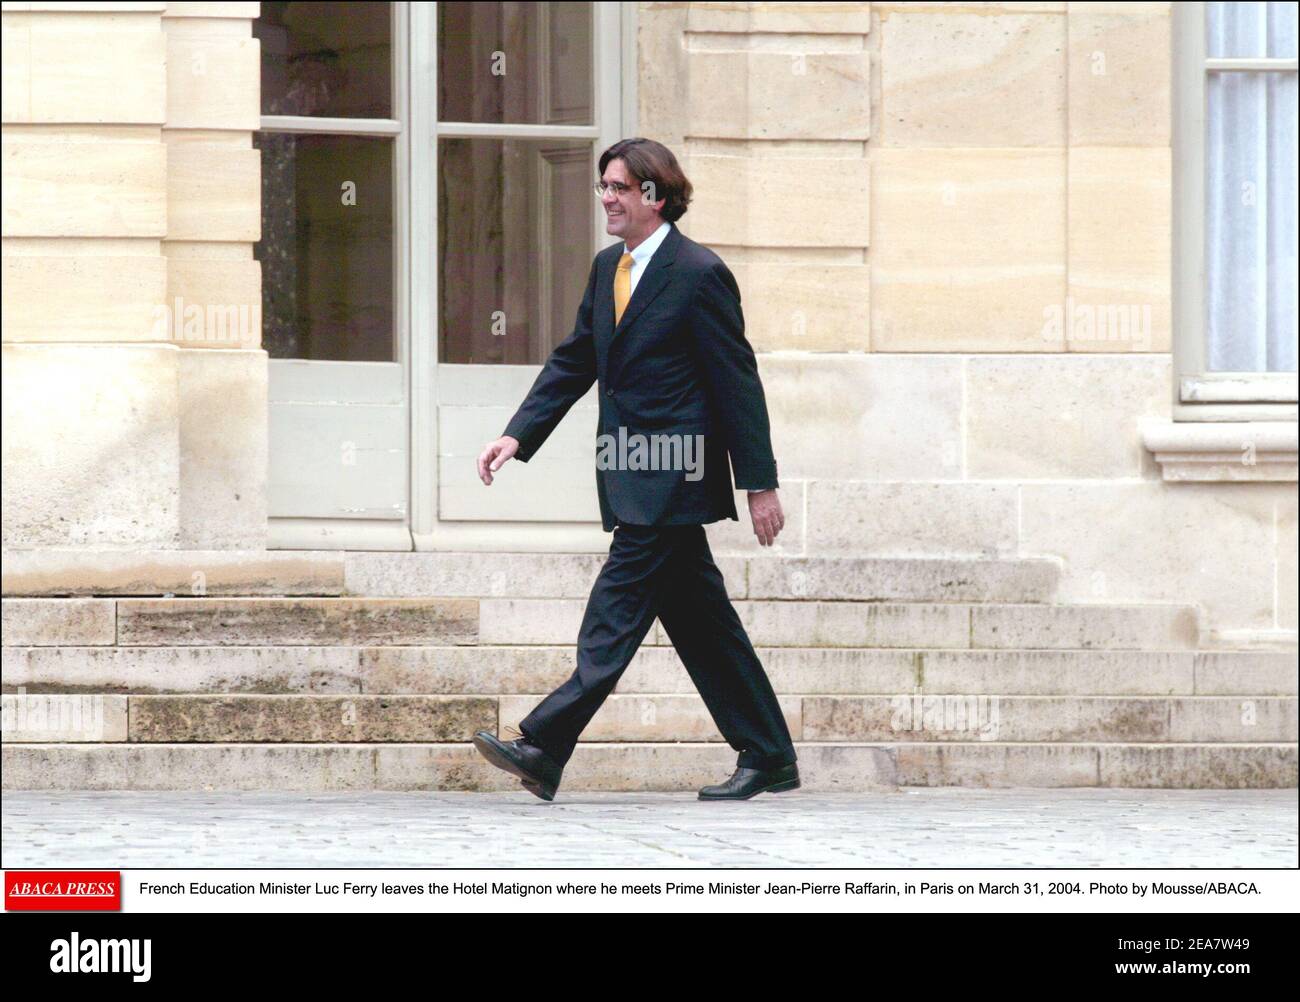 French Education Minister Luc Ferry leaves the Hotel Matignon where he meets Prime Minister Jean-Pierre Raffarin, in Paris on March 31, 2004. Photo by Mousse/ABACA. Stock Photo